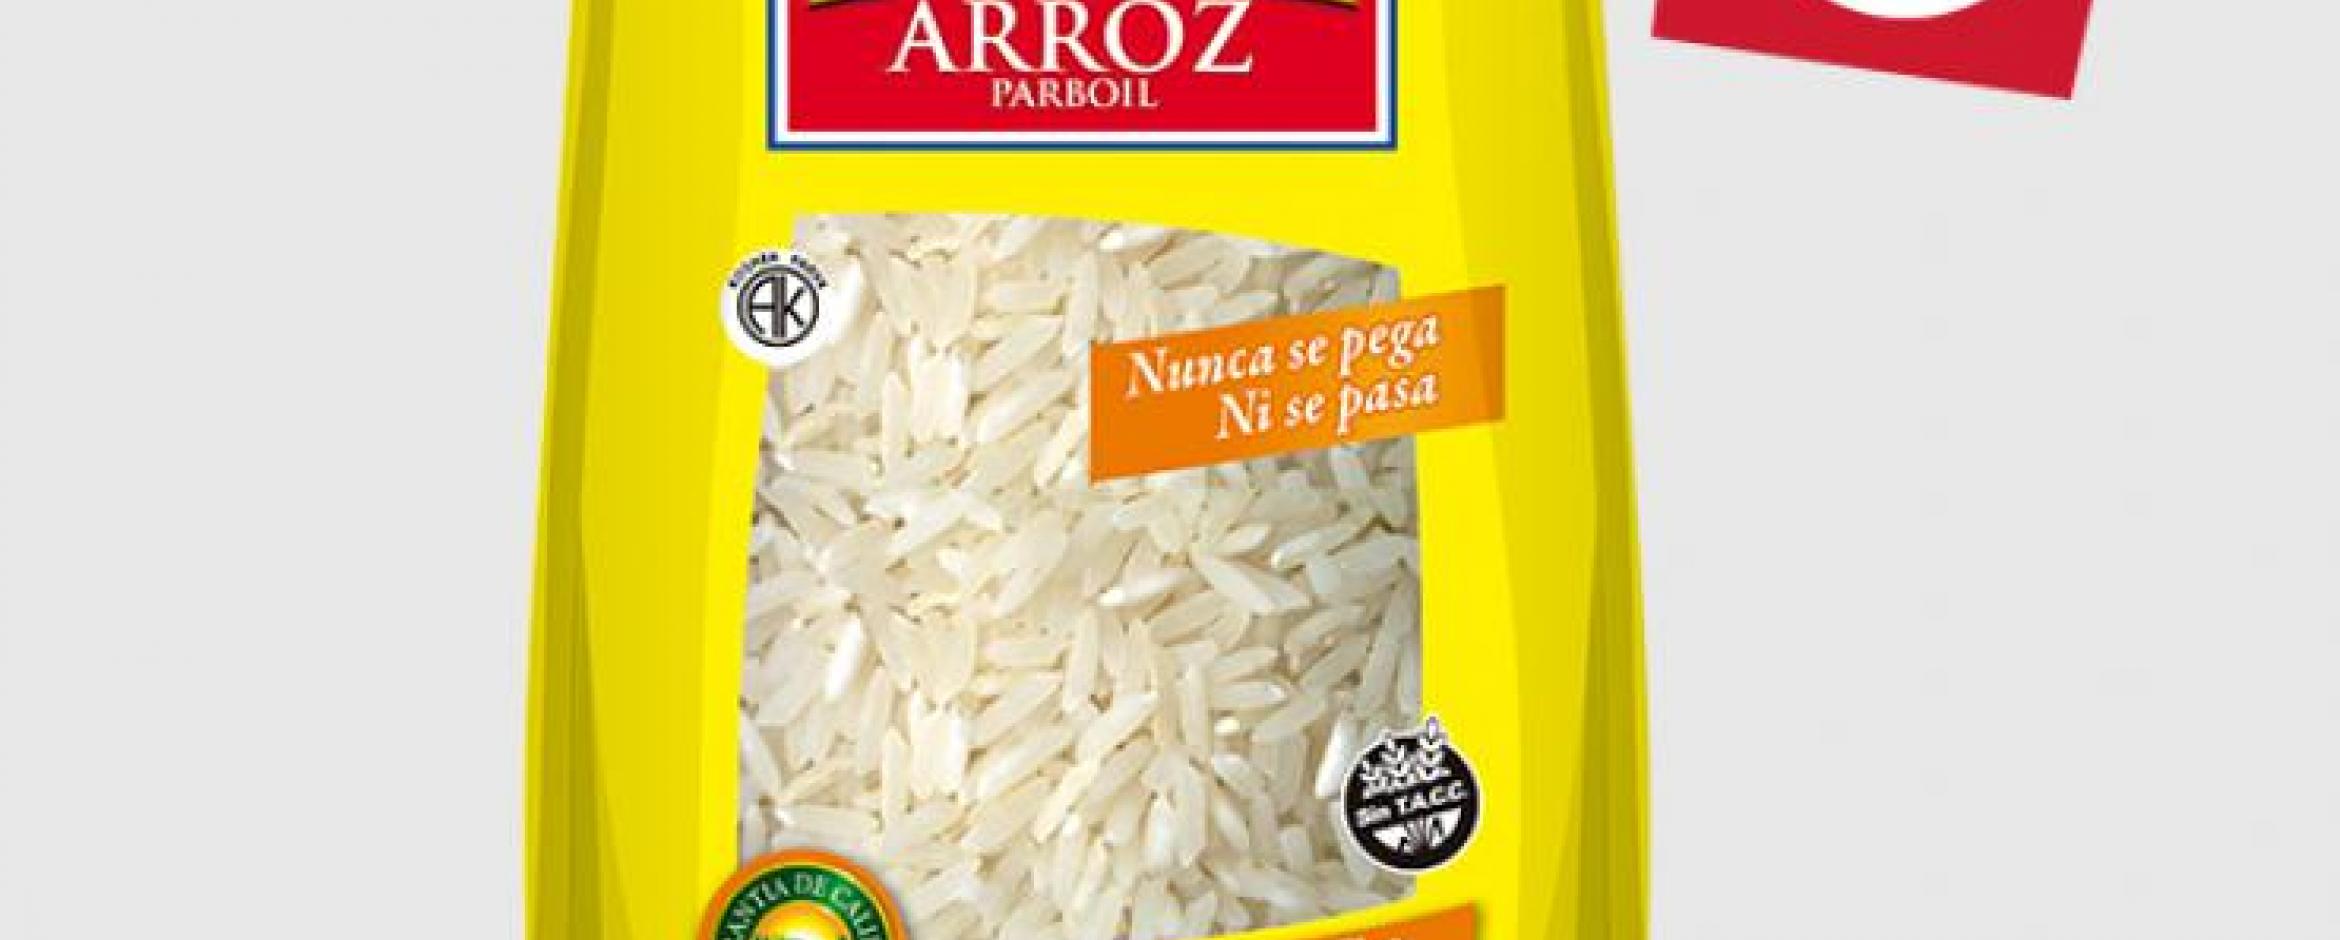 PARBOILED RICE (GLUTEN FREE) 1KG